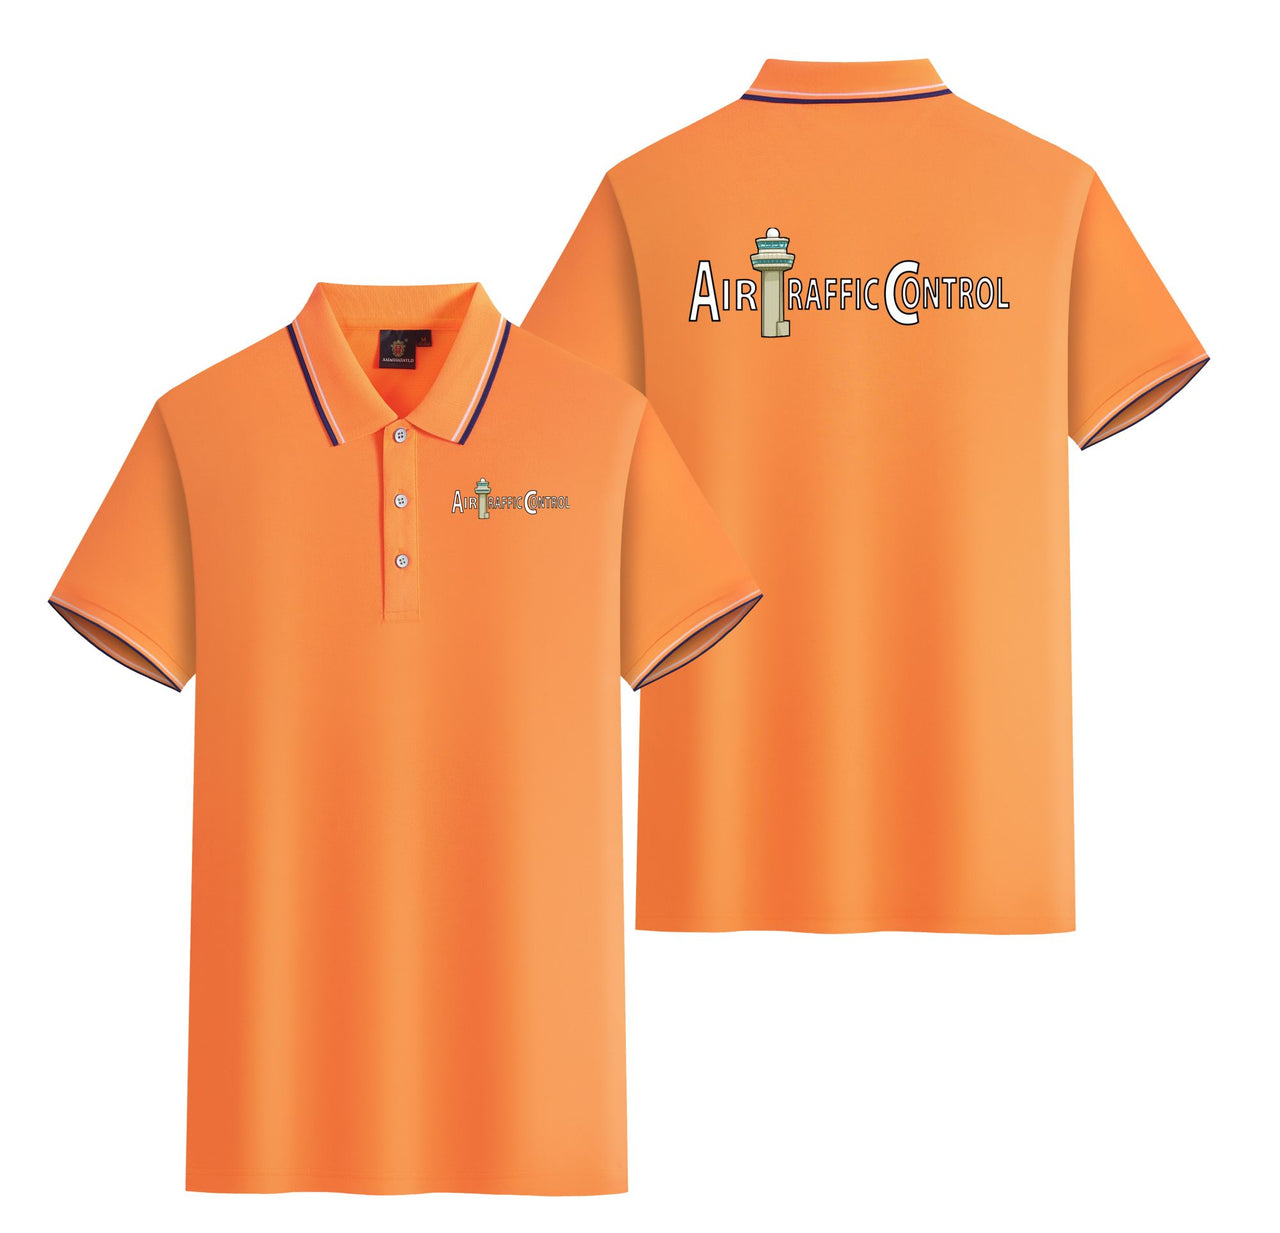 Air Traffic Control Designed Stylish Polo T-Shirts (Double-Side)